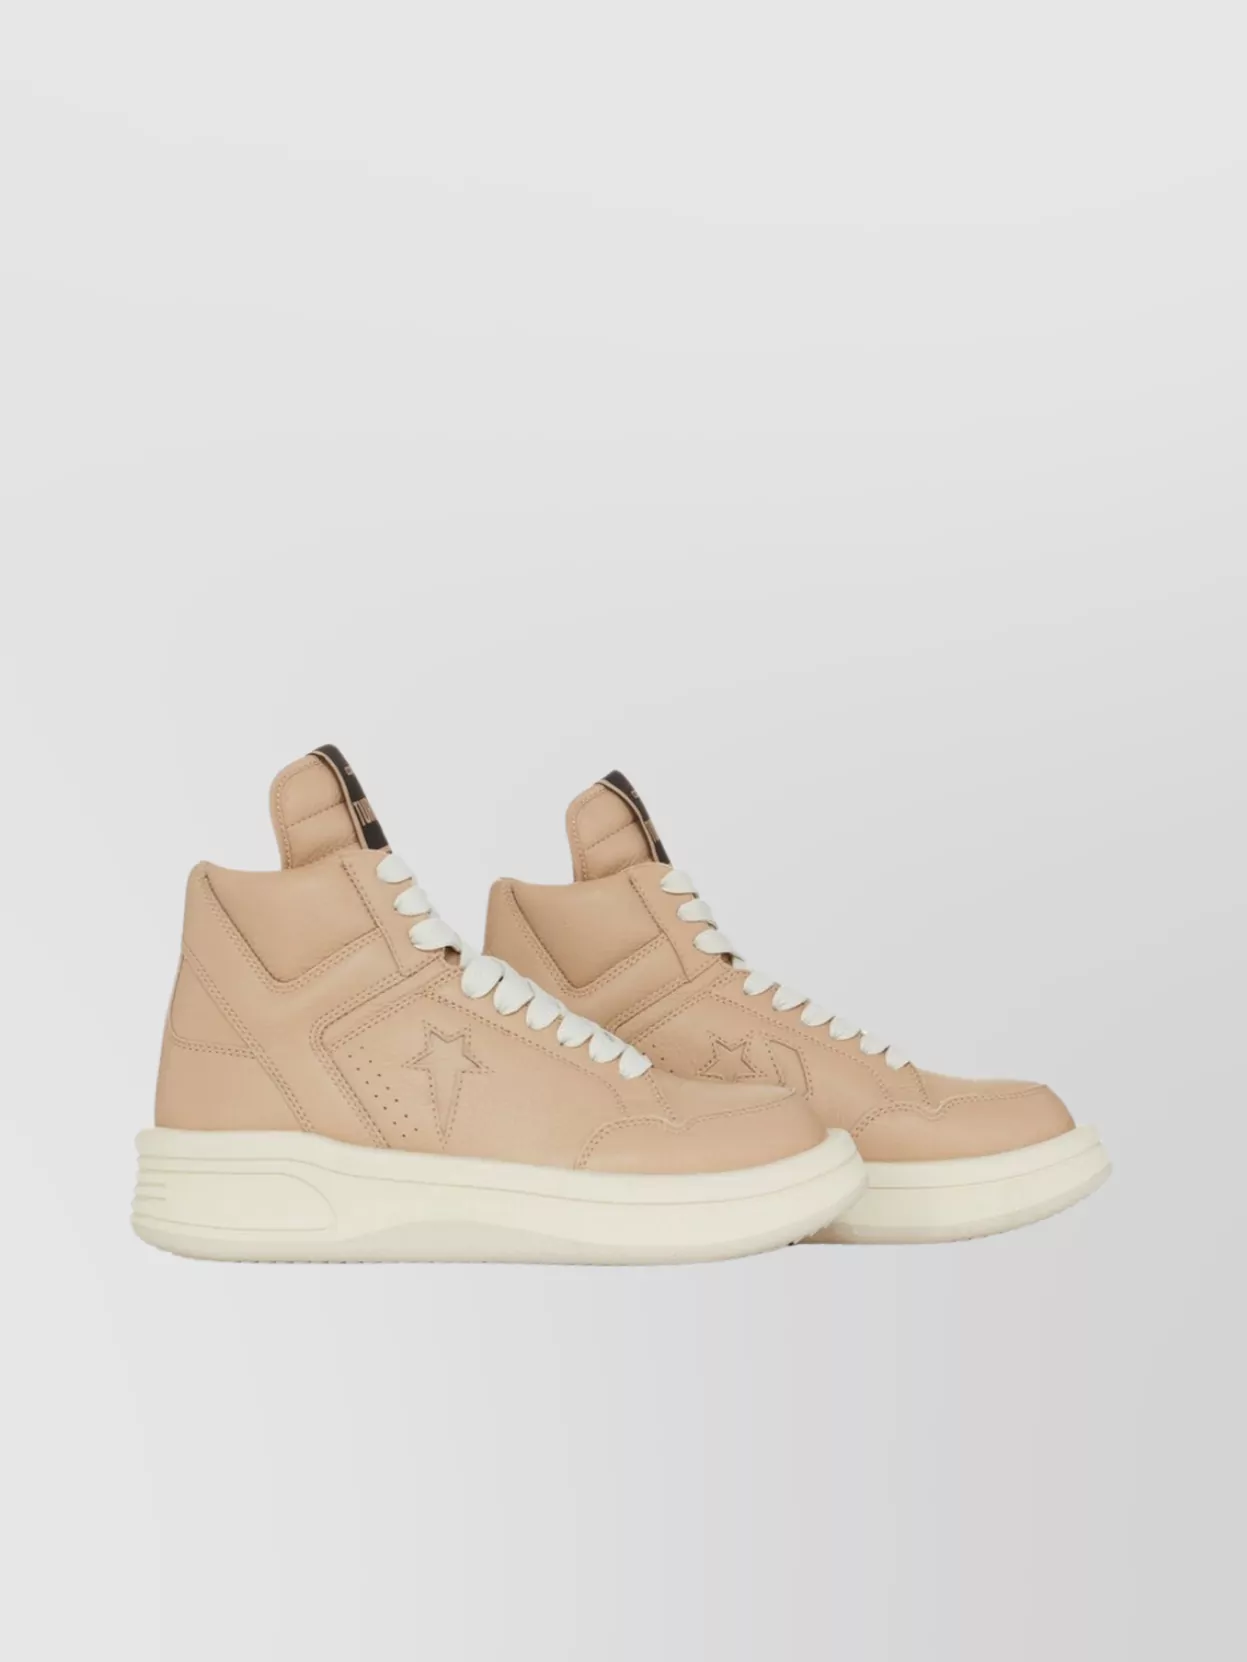 Shop Rick Owens Drkshdw High-top Sneakers Featuring Perforated Detailing